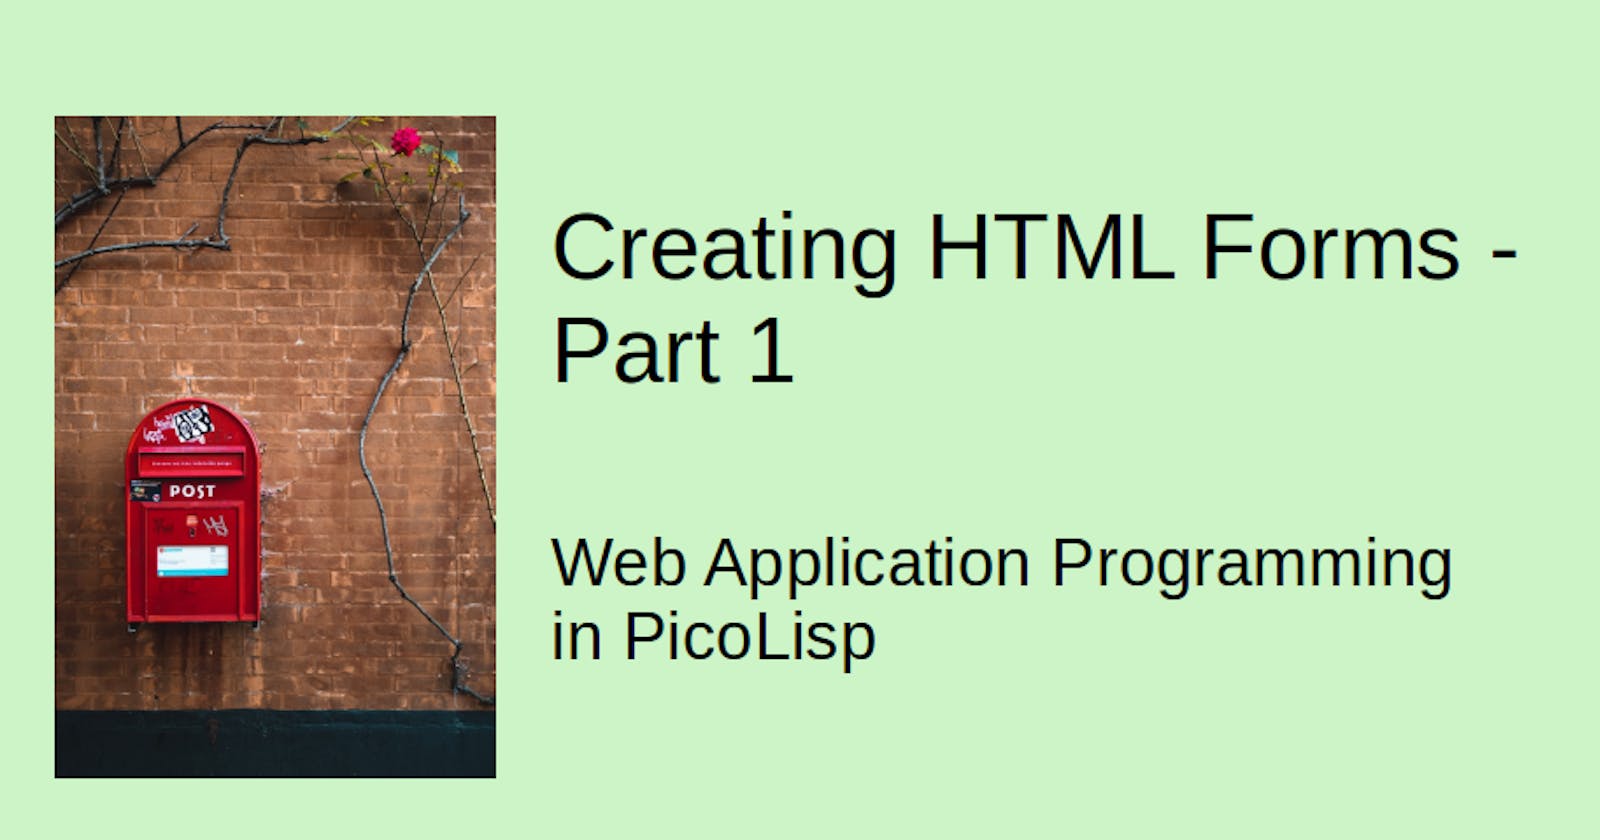 Web Application Programming in PicoLisp: Creating HTML Forms, Part 1